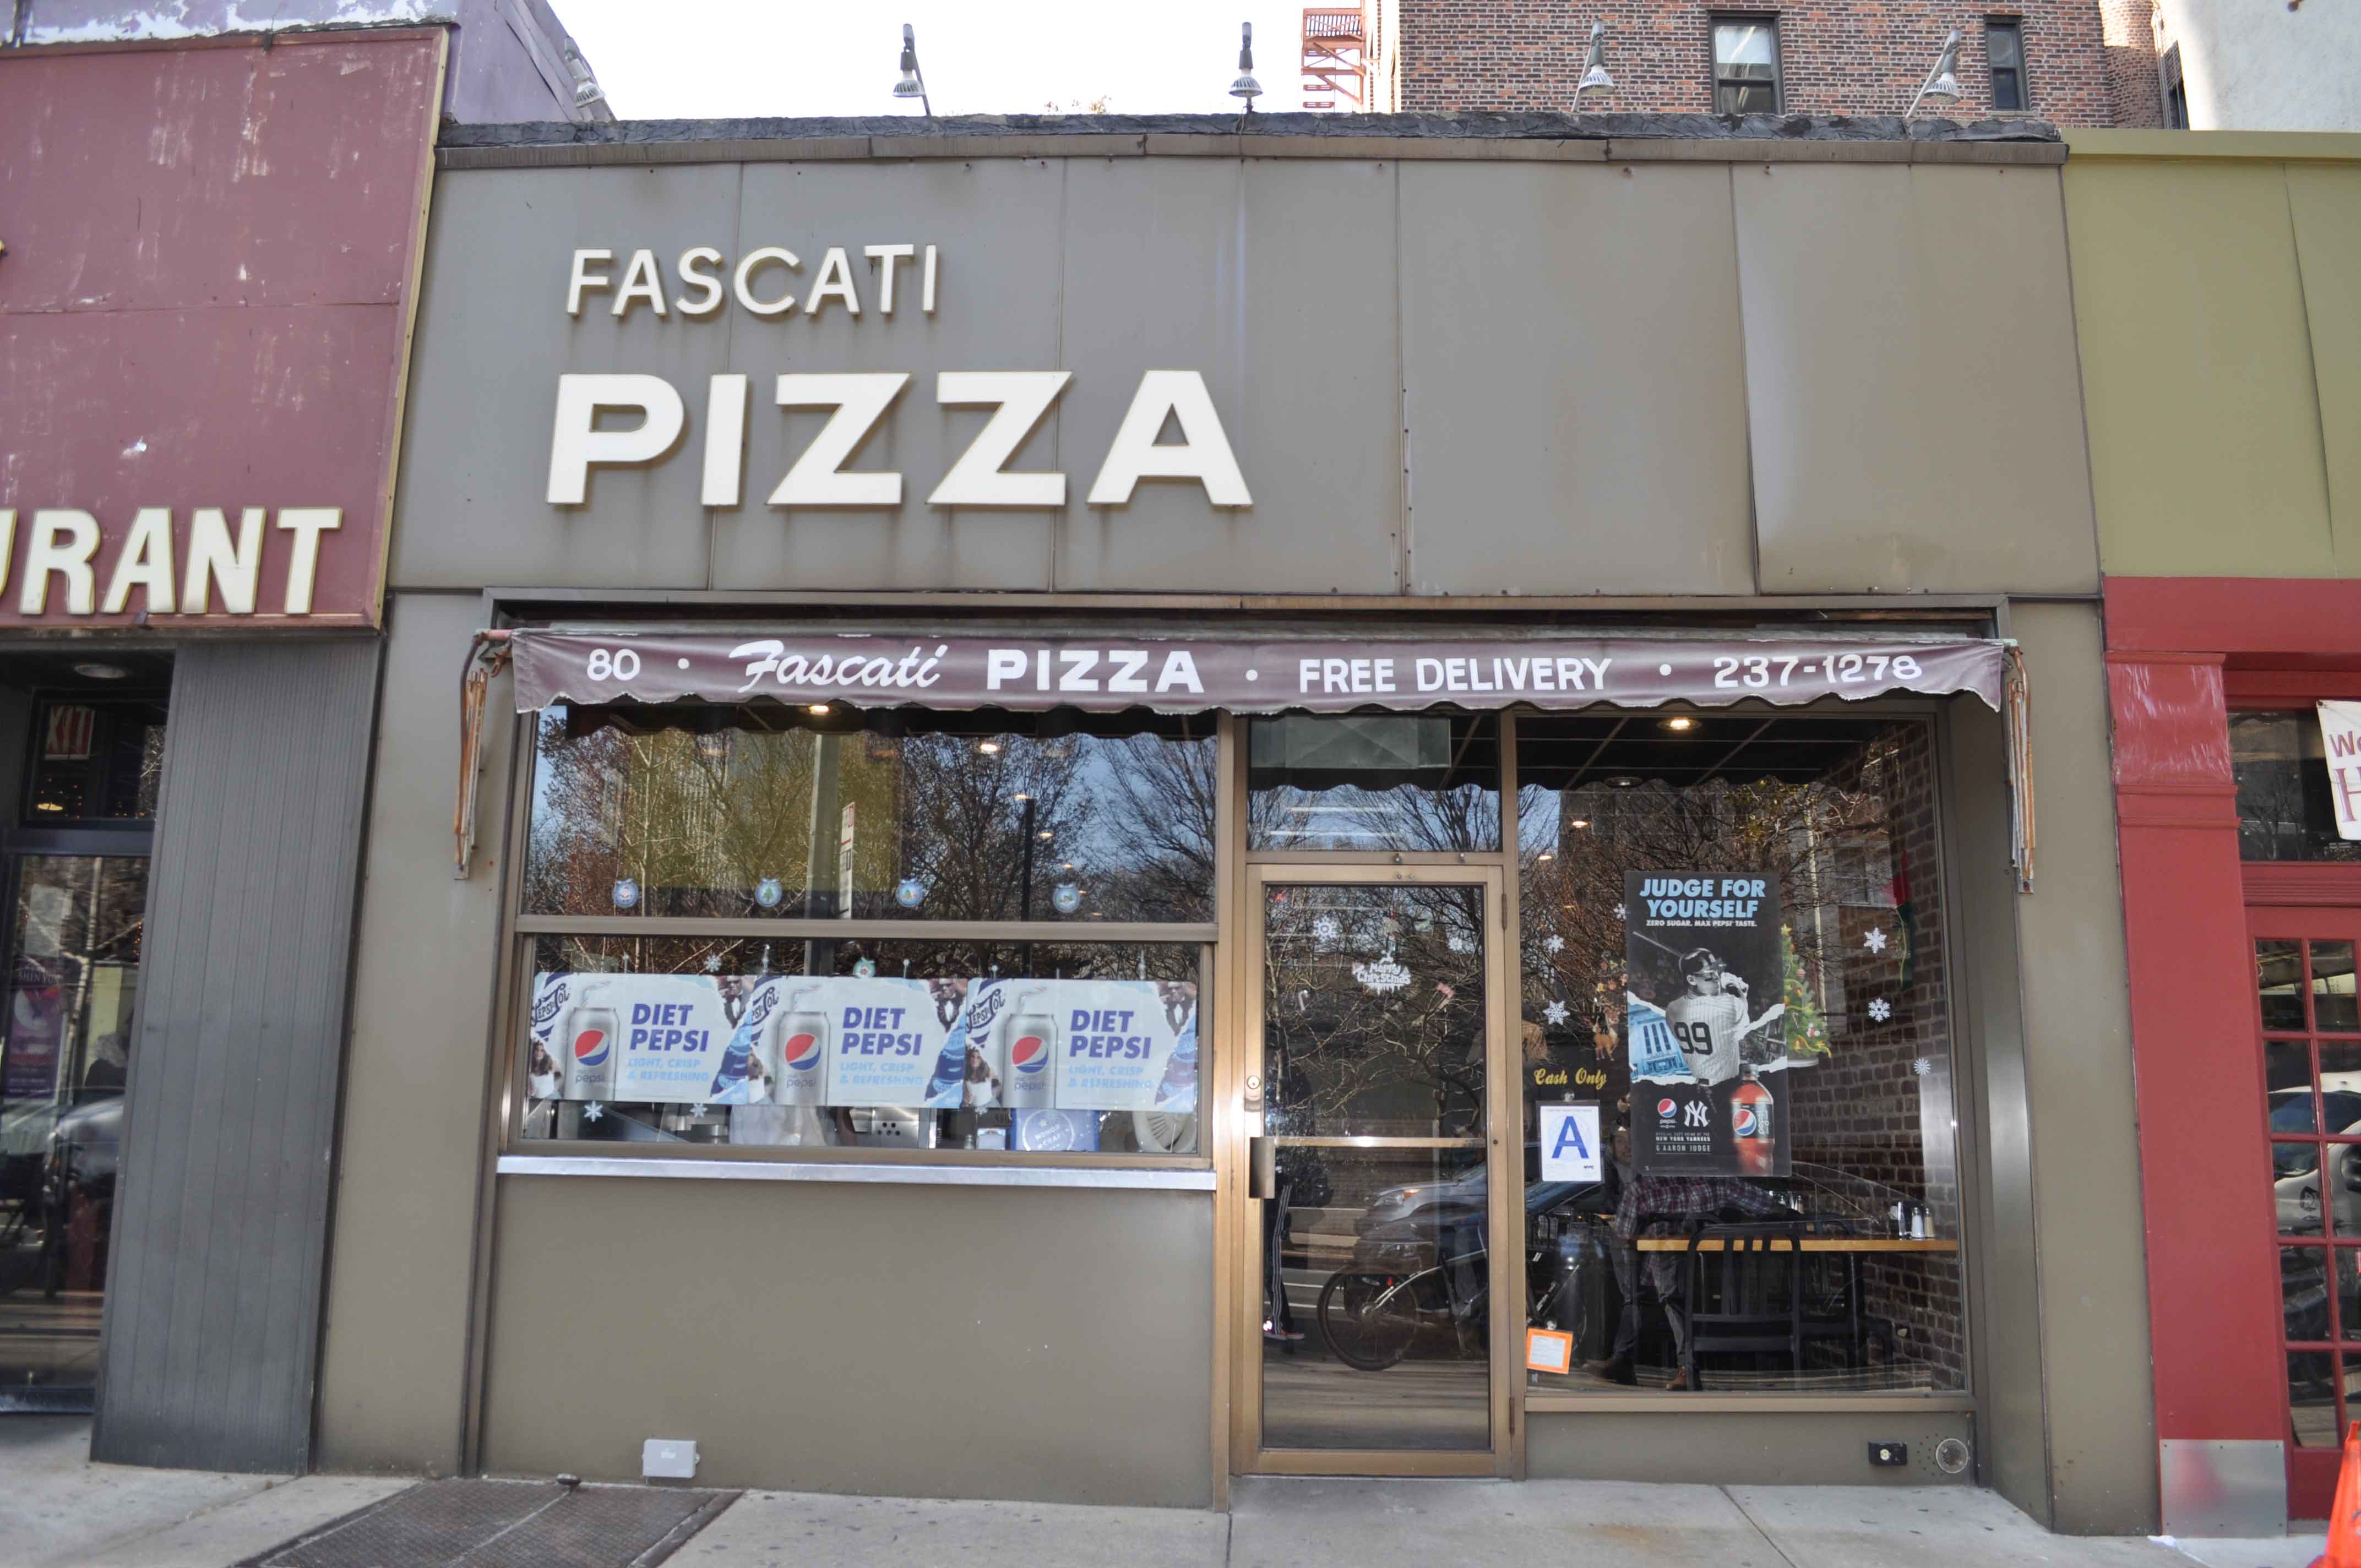 2 Pierrepont residents will love the local vibe of Fascati Pizzeria, a favorite counter-service neighborhood restaurant